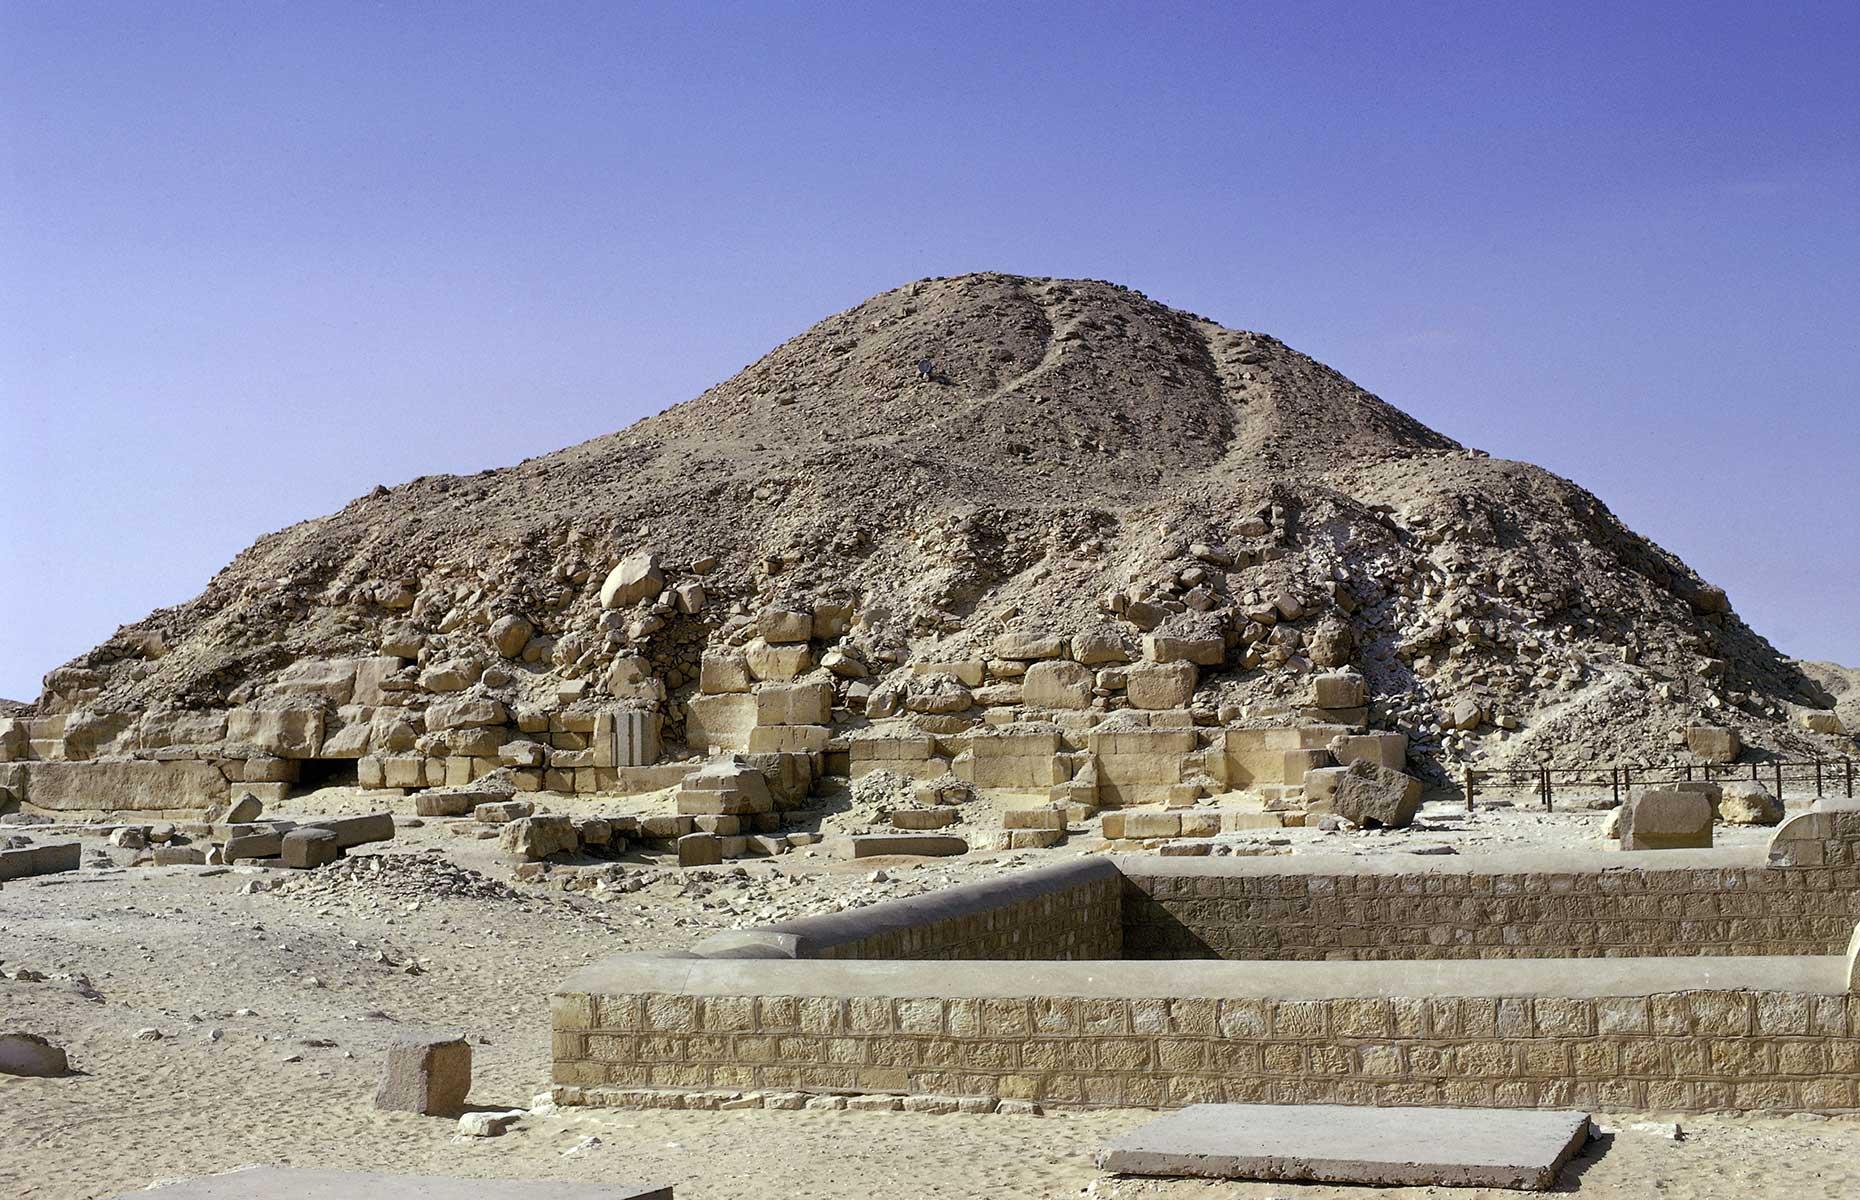 <p>King Unas (2465-2325 BC) ruled during the 5th dynasty, and his pyramid at Saqqara was once 141 feet (43m) tall, but it fell into decay after his death and later Egyptian kings removed and reused most of the stones. The pyramid has long been in a sorry state, but you can still see an inscription left by Prince Khaemwaset, the son of Ramesses II and High Priest of Ptah in Memphis, who restored the monument in the 13th century BC.</p>